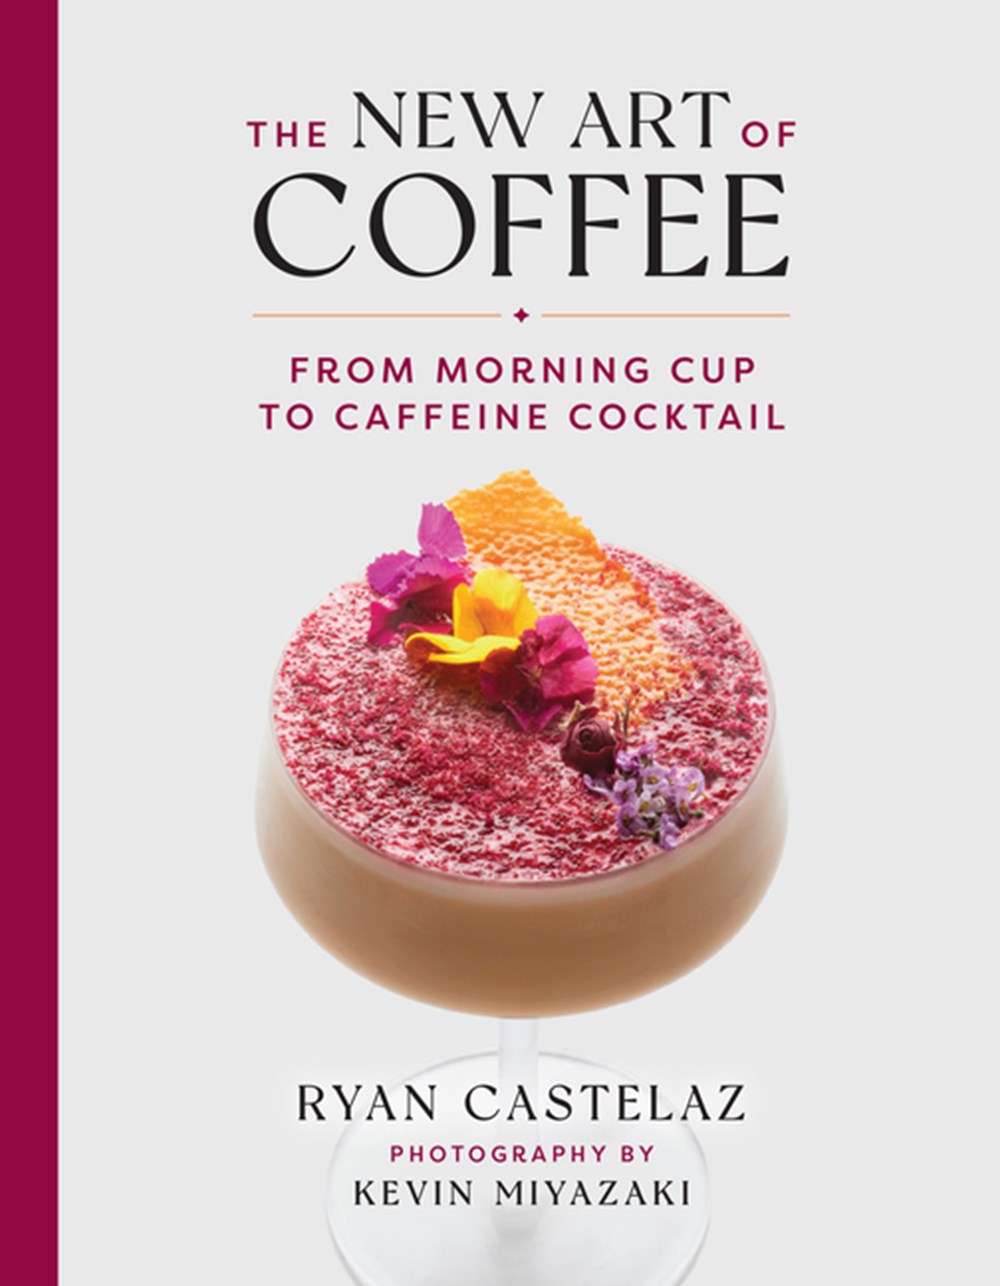 New Art of Coffee: From Morning Cup to Caffeine Cocktail